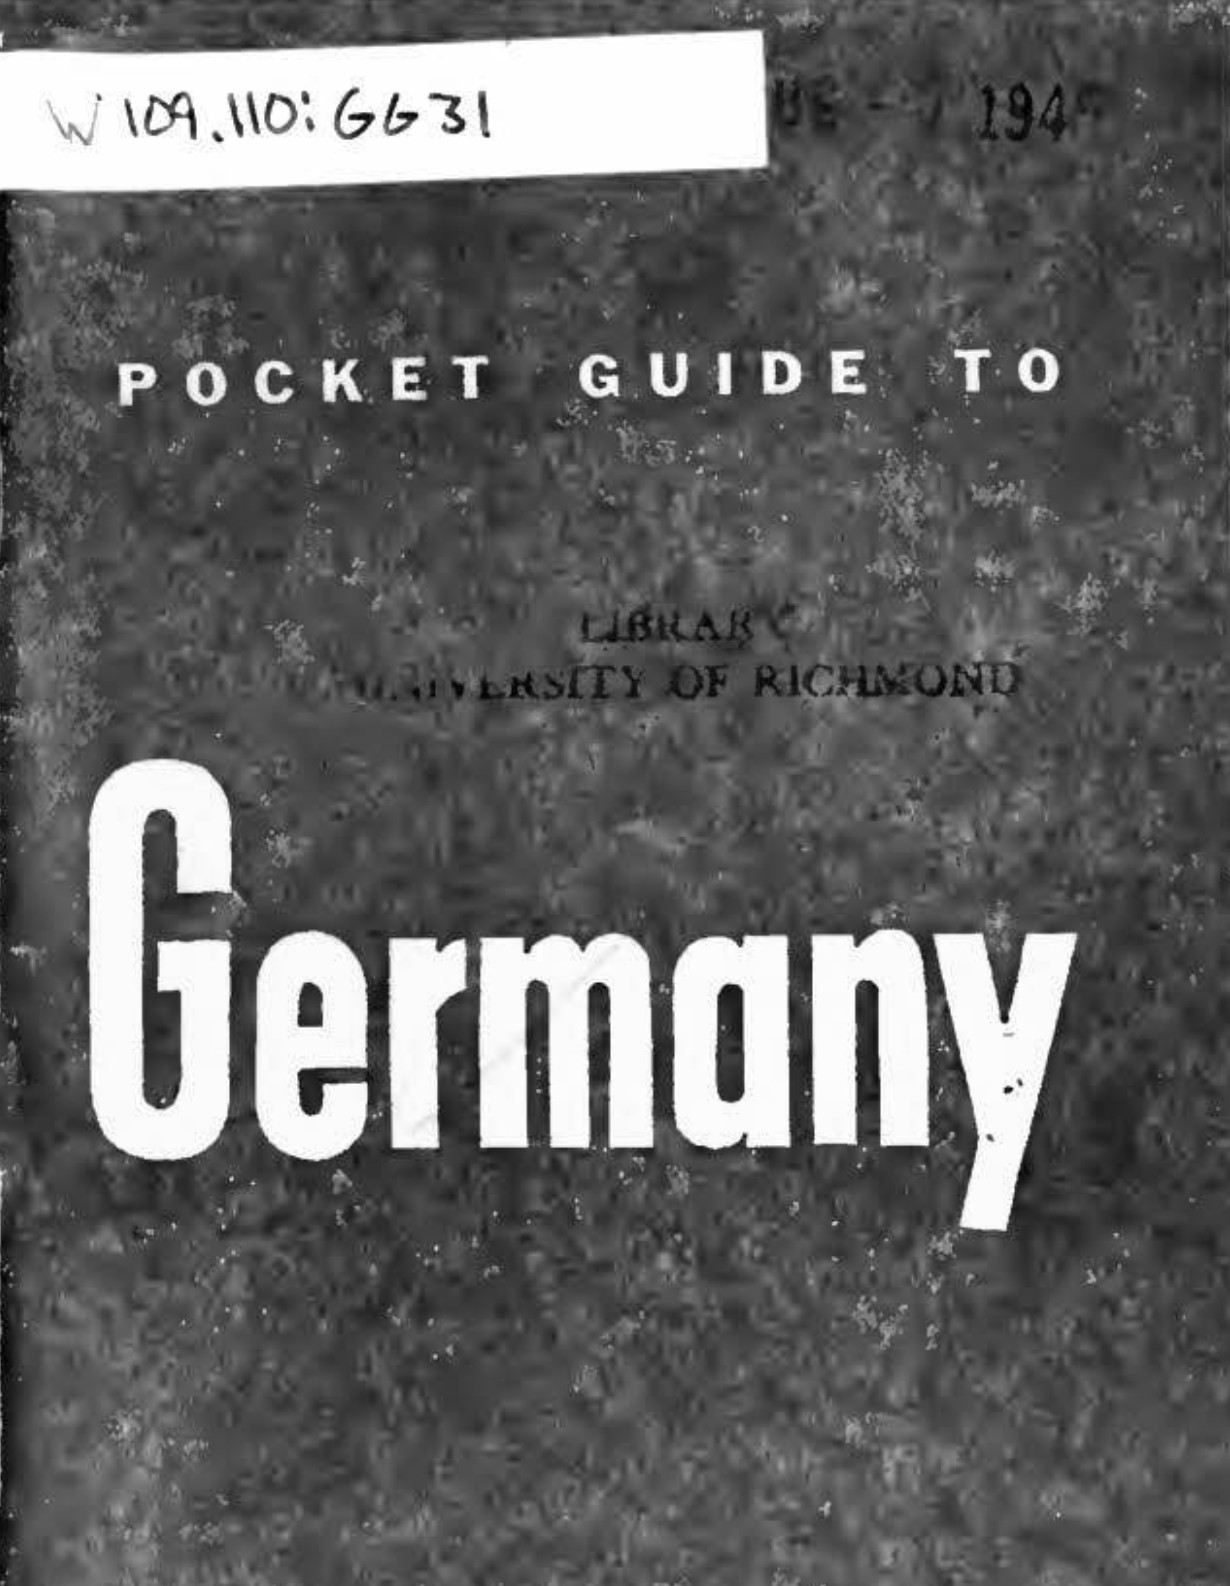 Pocket Guide To Germany (1944) by United States Army